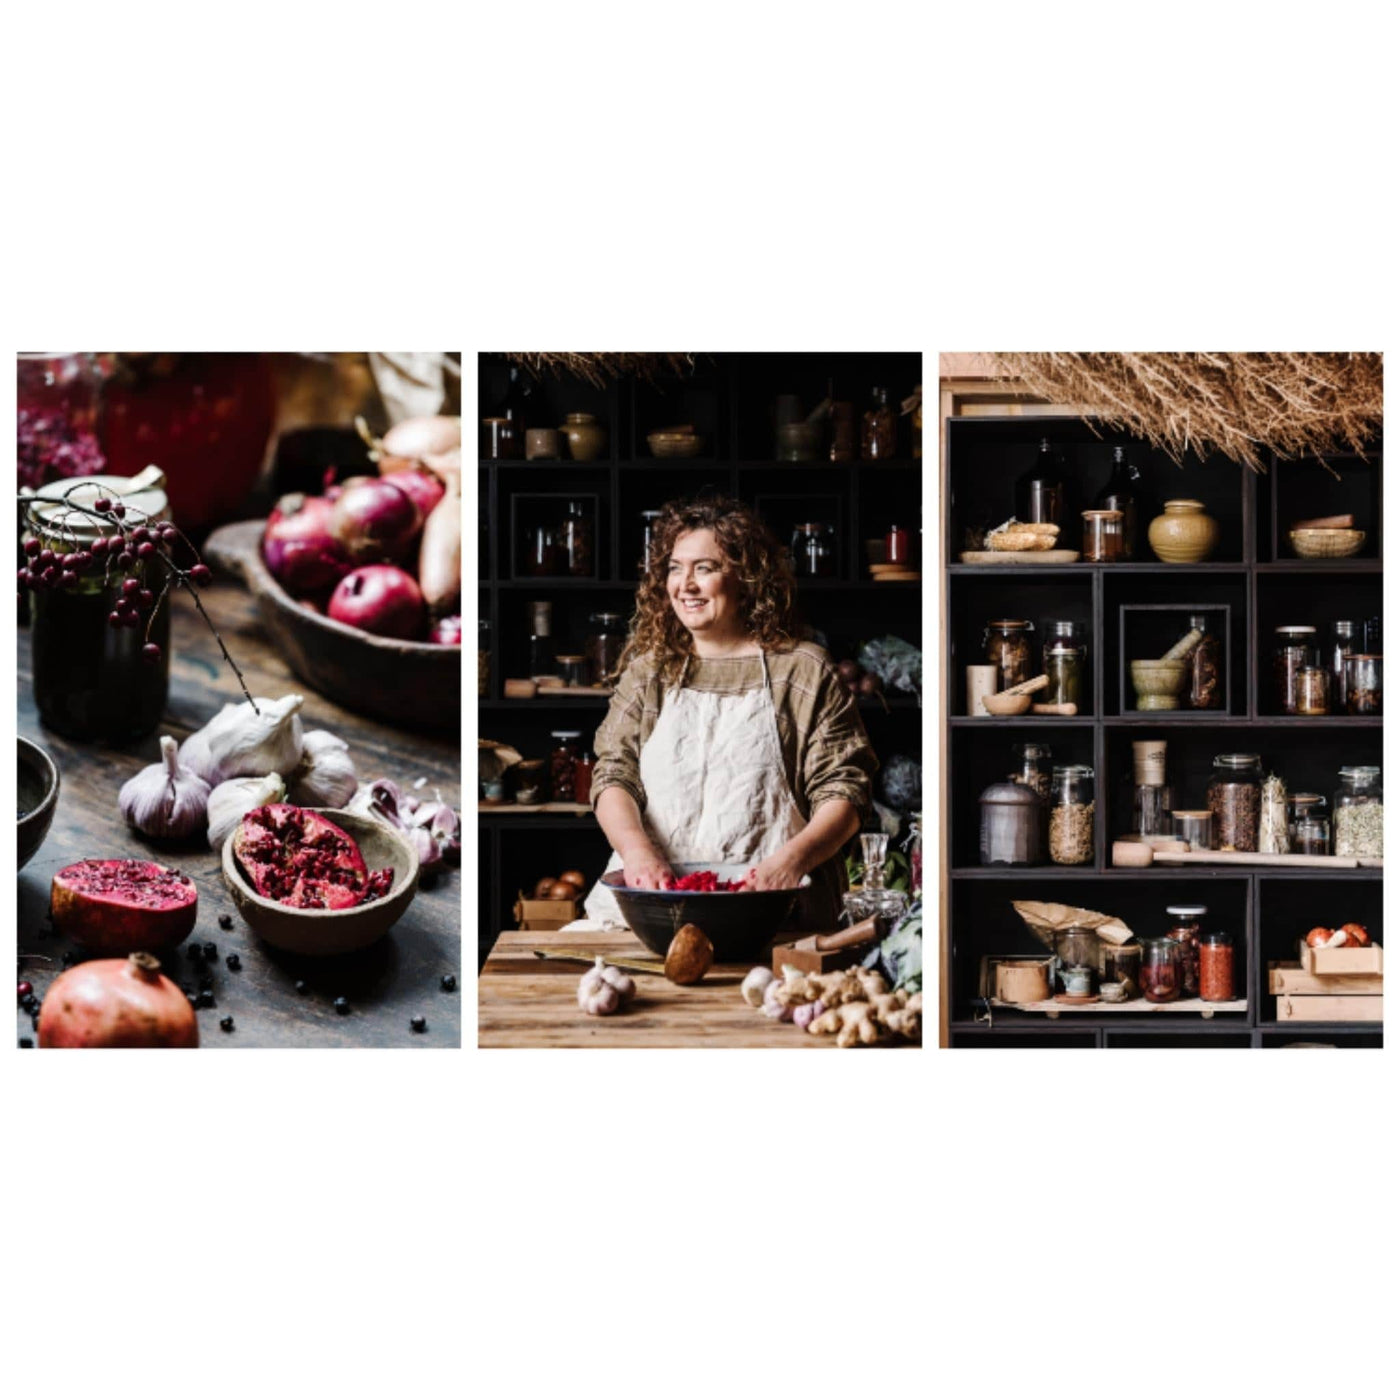 Faire Magazine photos spread of three photos of woman in kitchen working with fruit and shelves of containers.. 